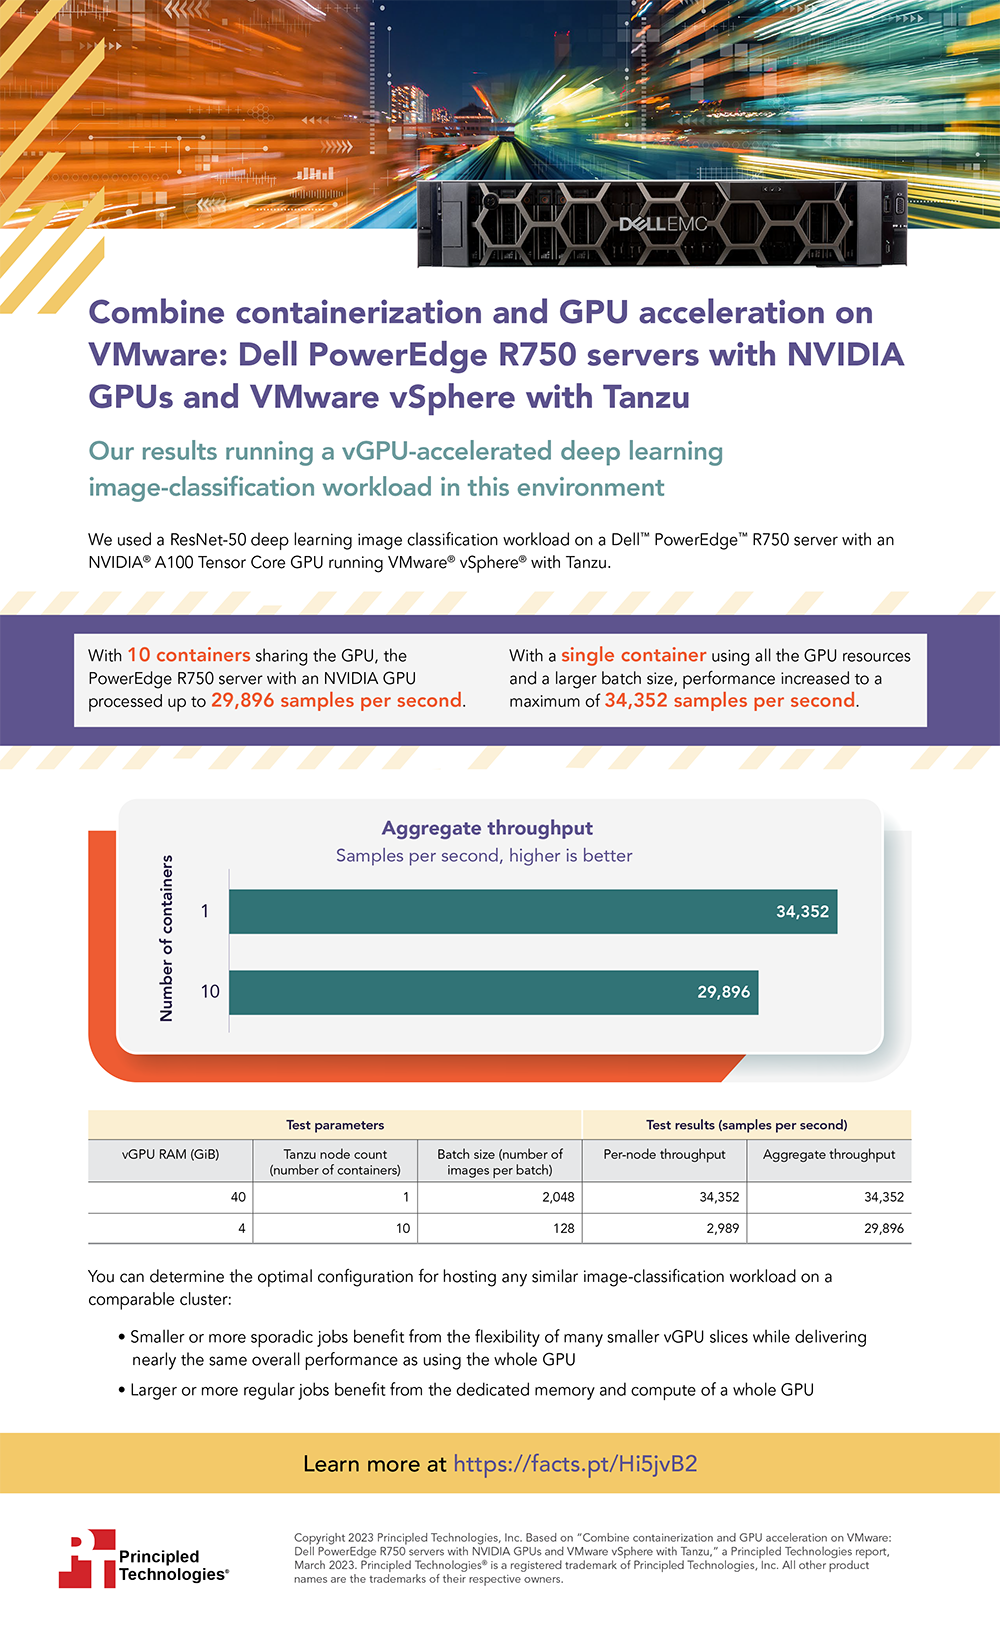 Combine containerization and GPU acceleration on VMware: Dell PowerEdge R750 servers with NVIDIA GPUs and VMware vSphere with Tanzu - Infographic